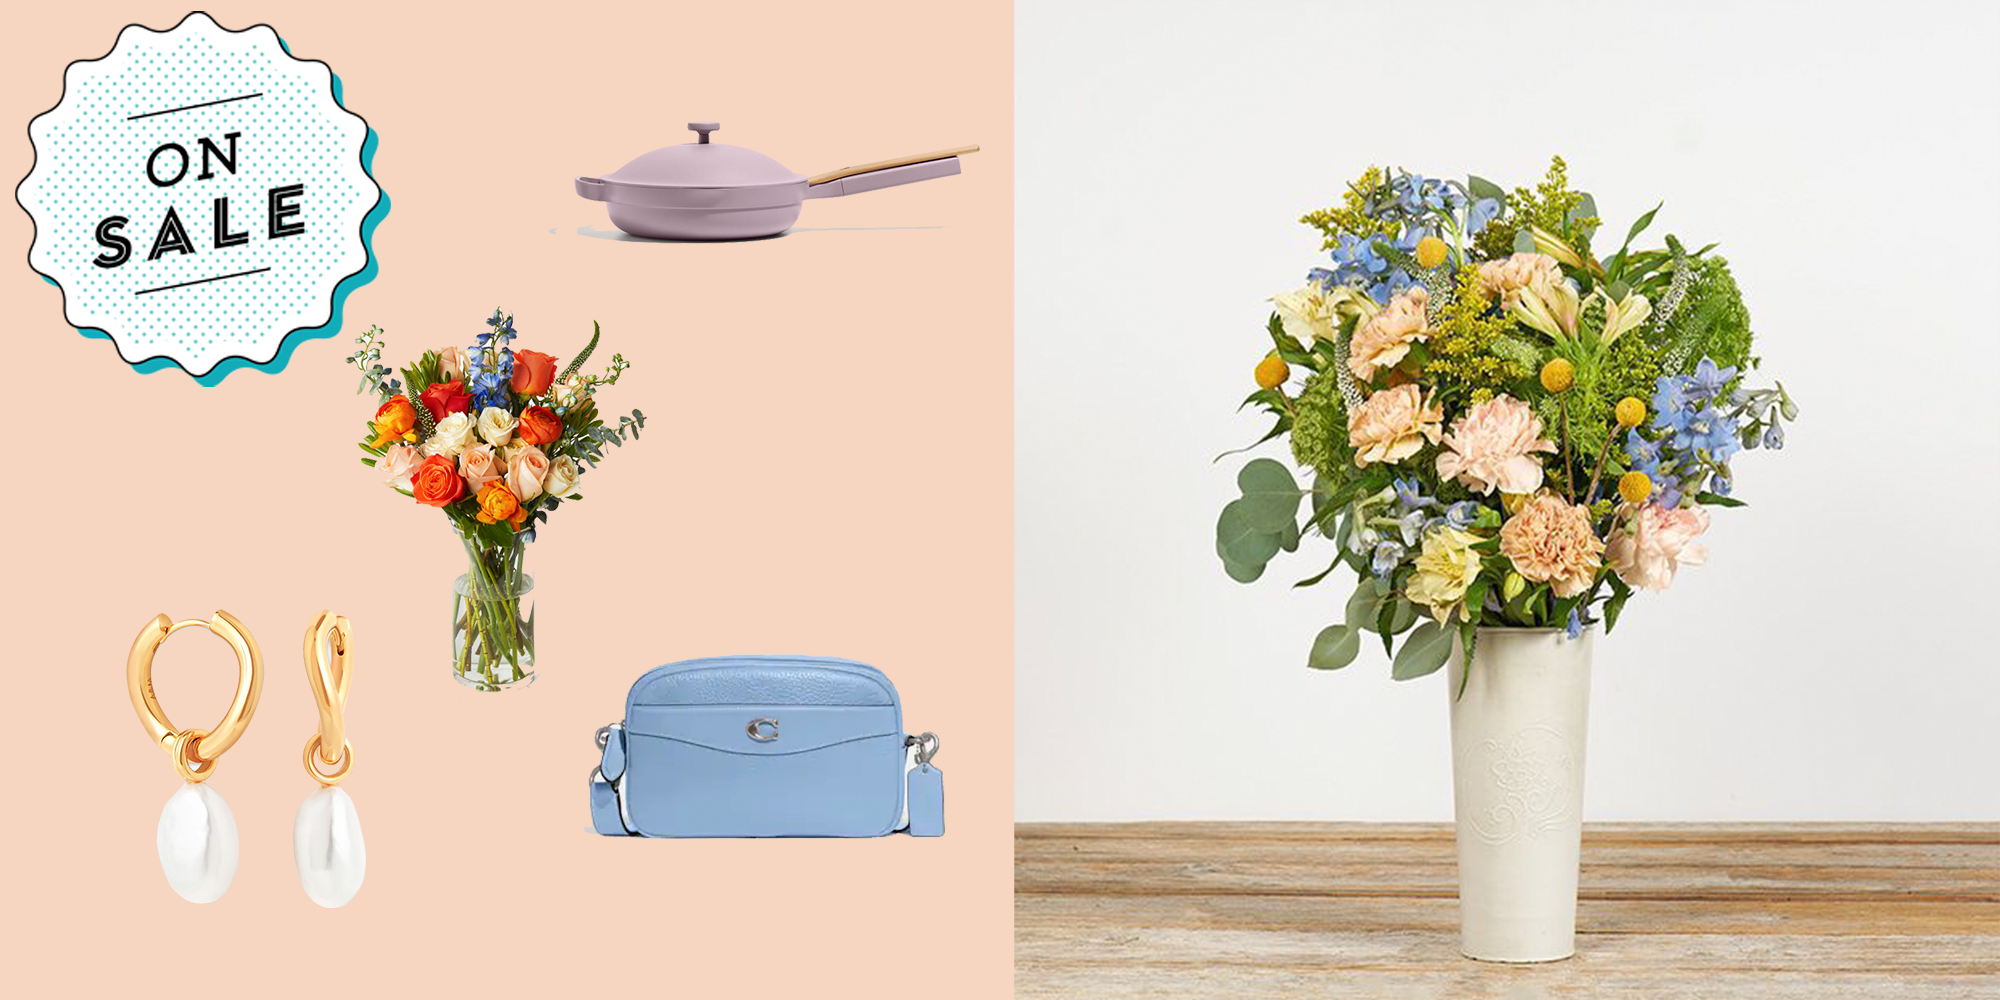 12 Gift Ideas For Your Mother-In-Law: #GiftGuide Mother's Day Special  Edition